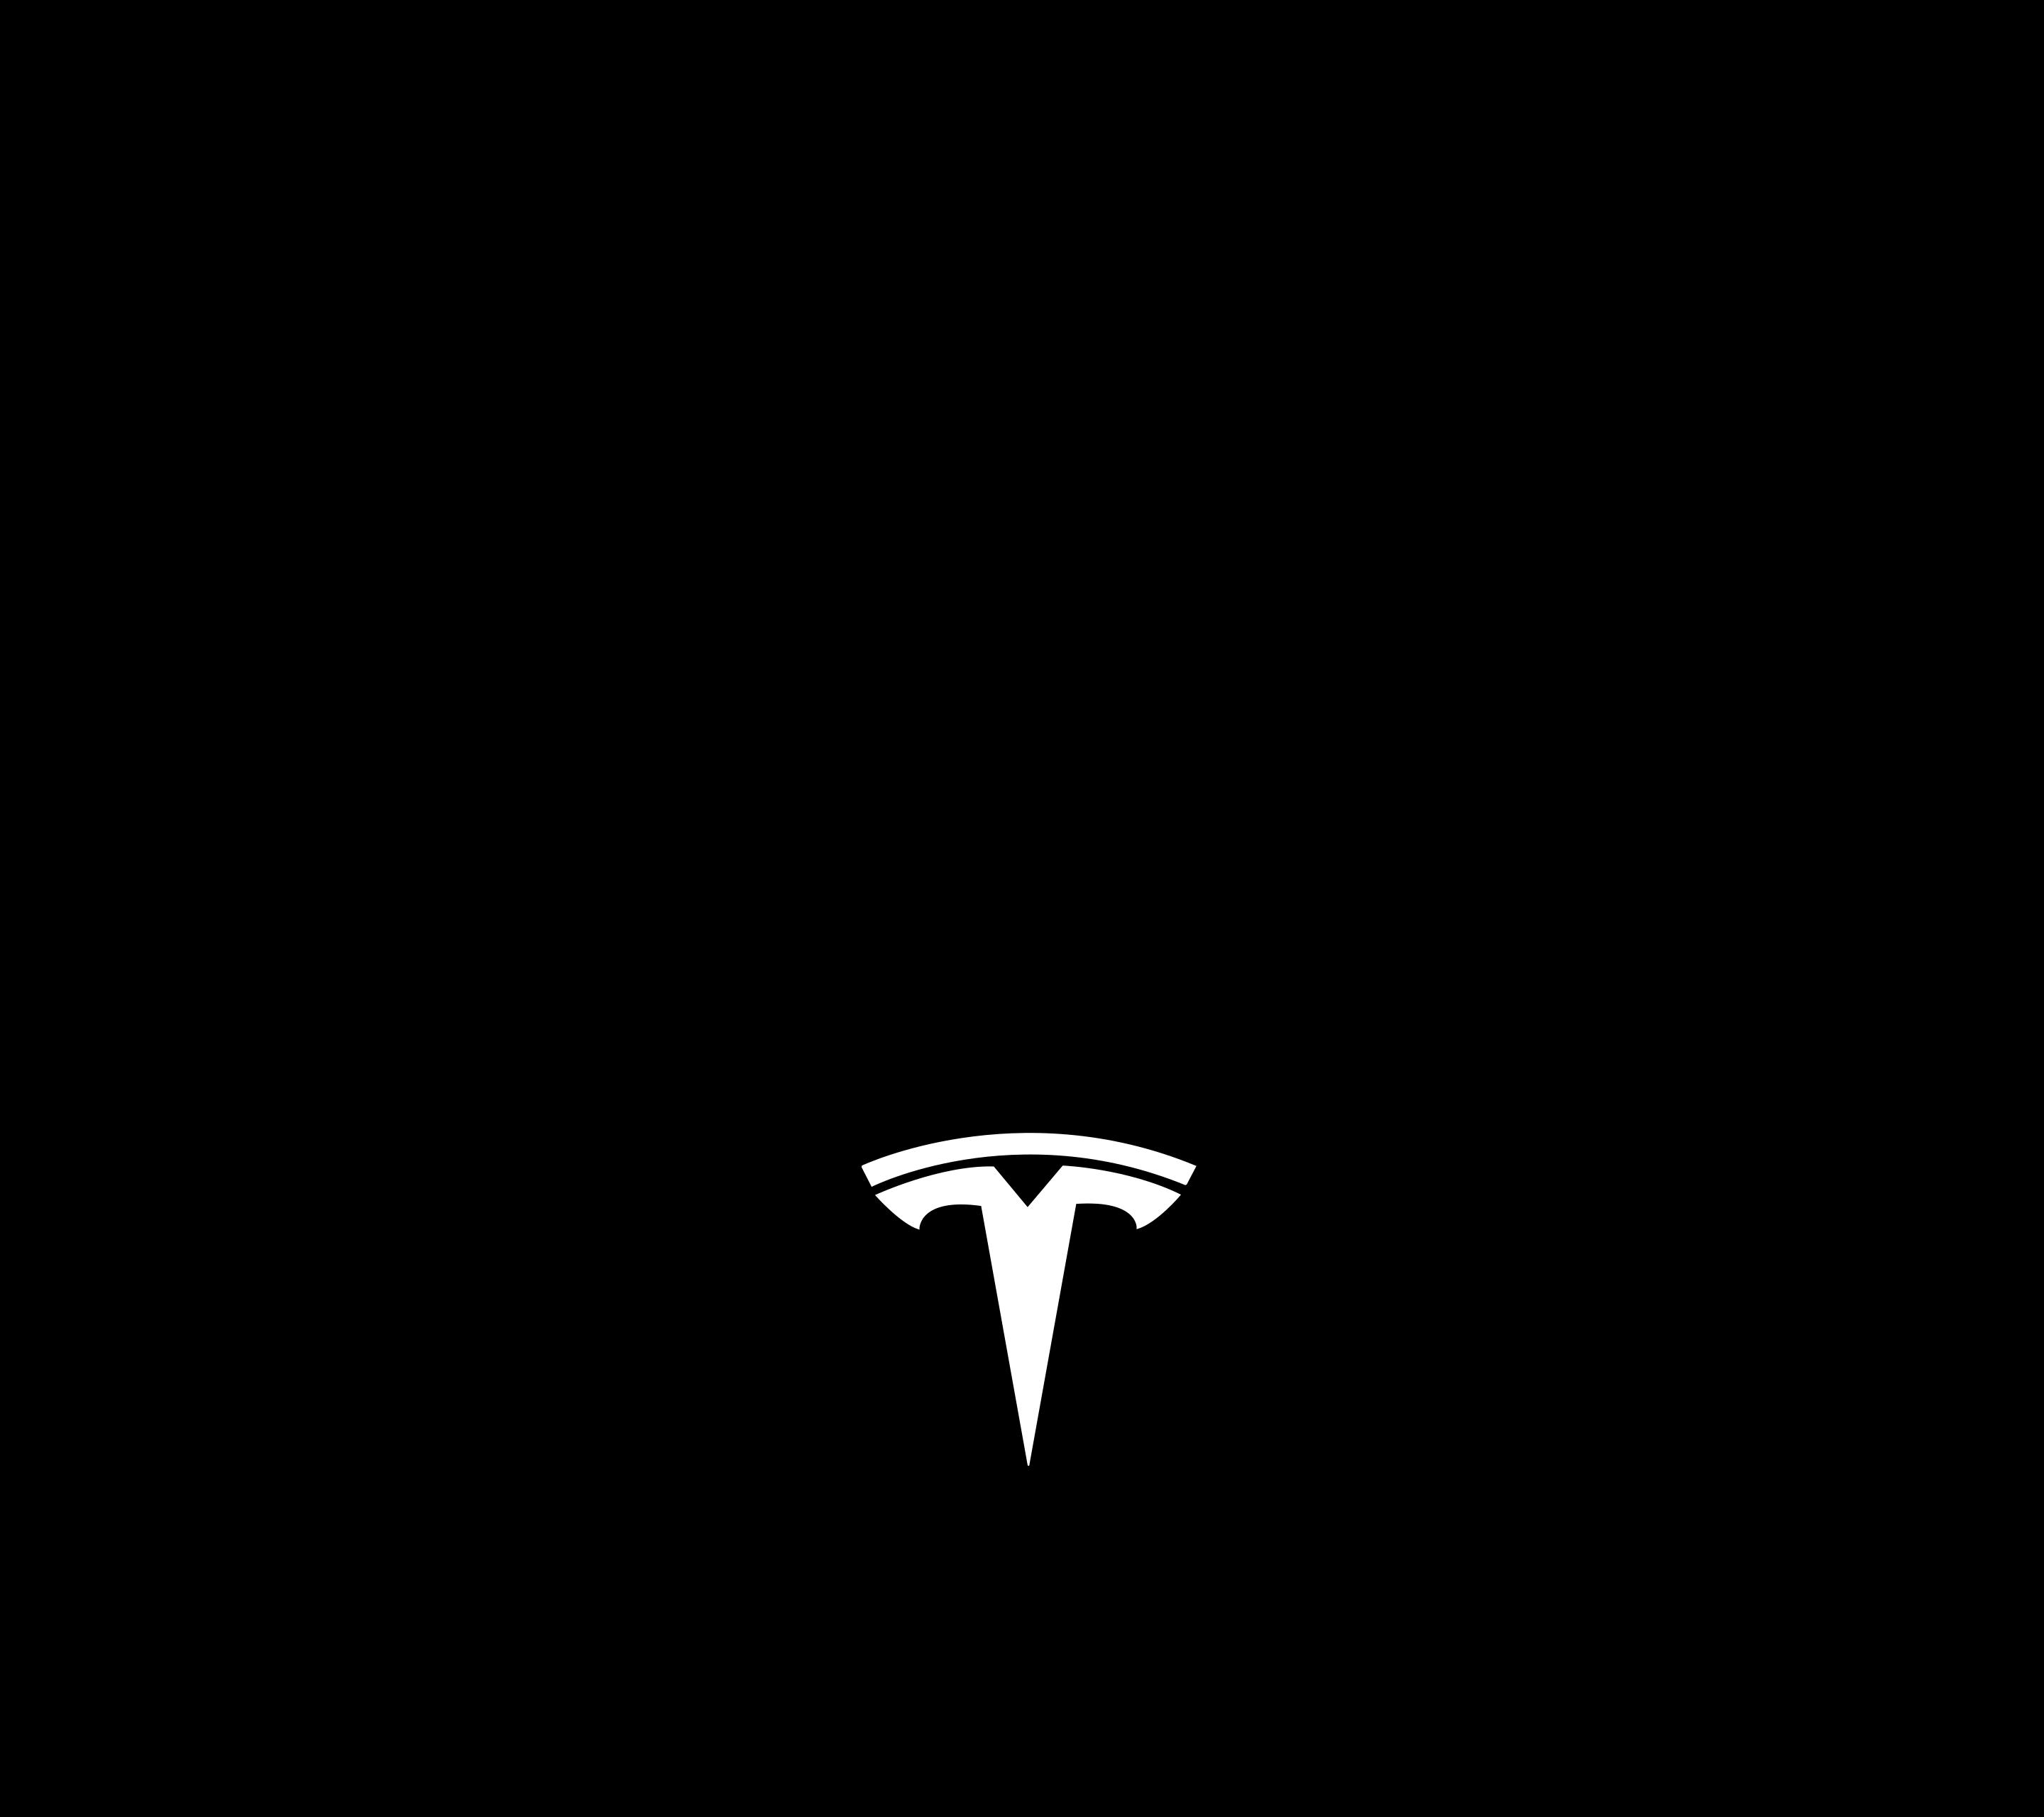 I traced a vector of the tesla logo so I could make a full